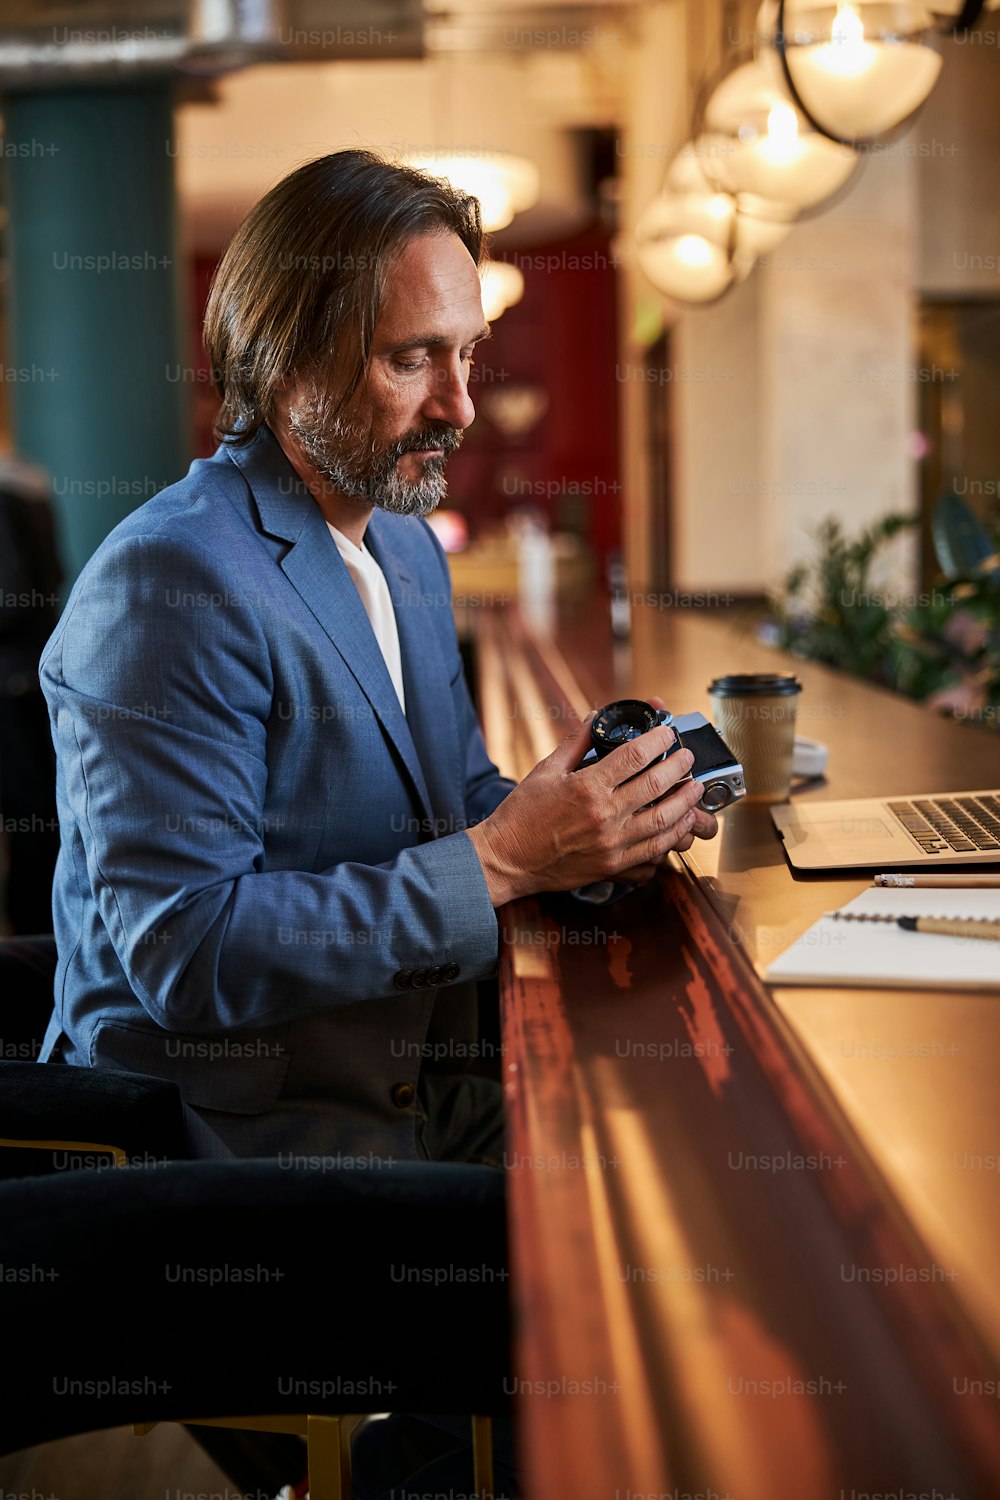 Concentrated man in smart suit looking at his camera lense while sitting alone at a bar counter